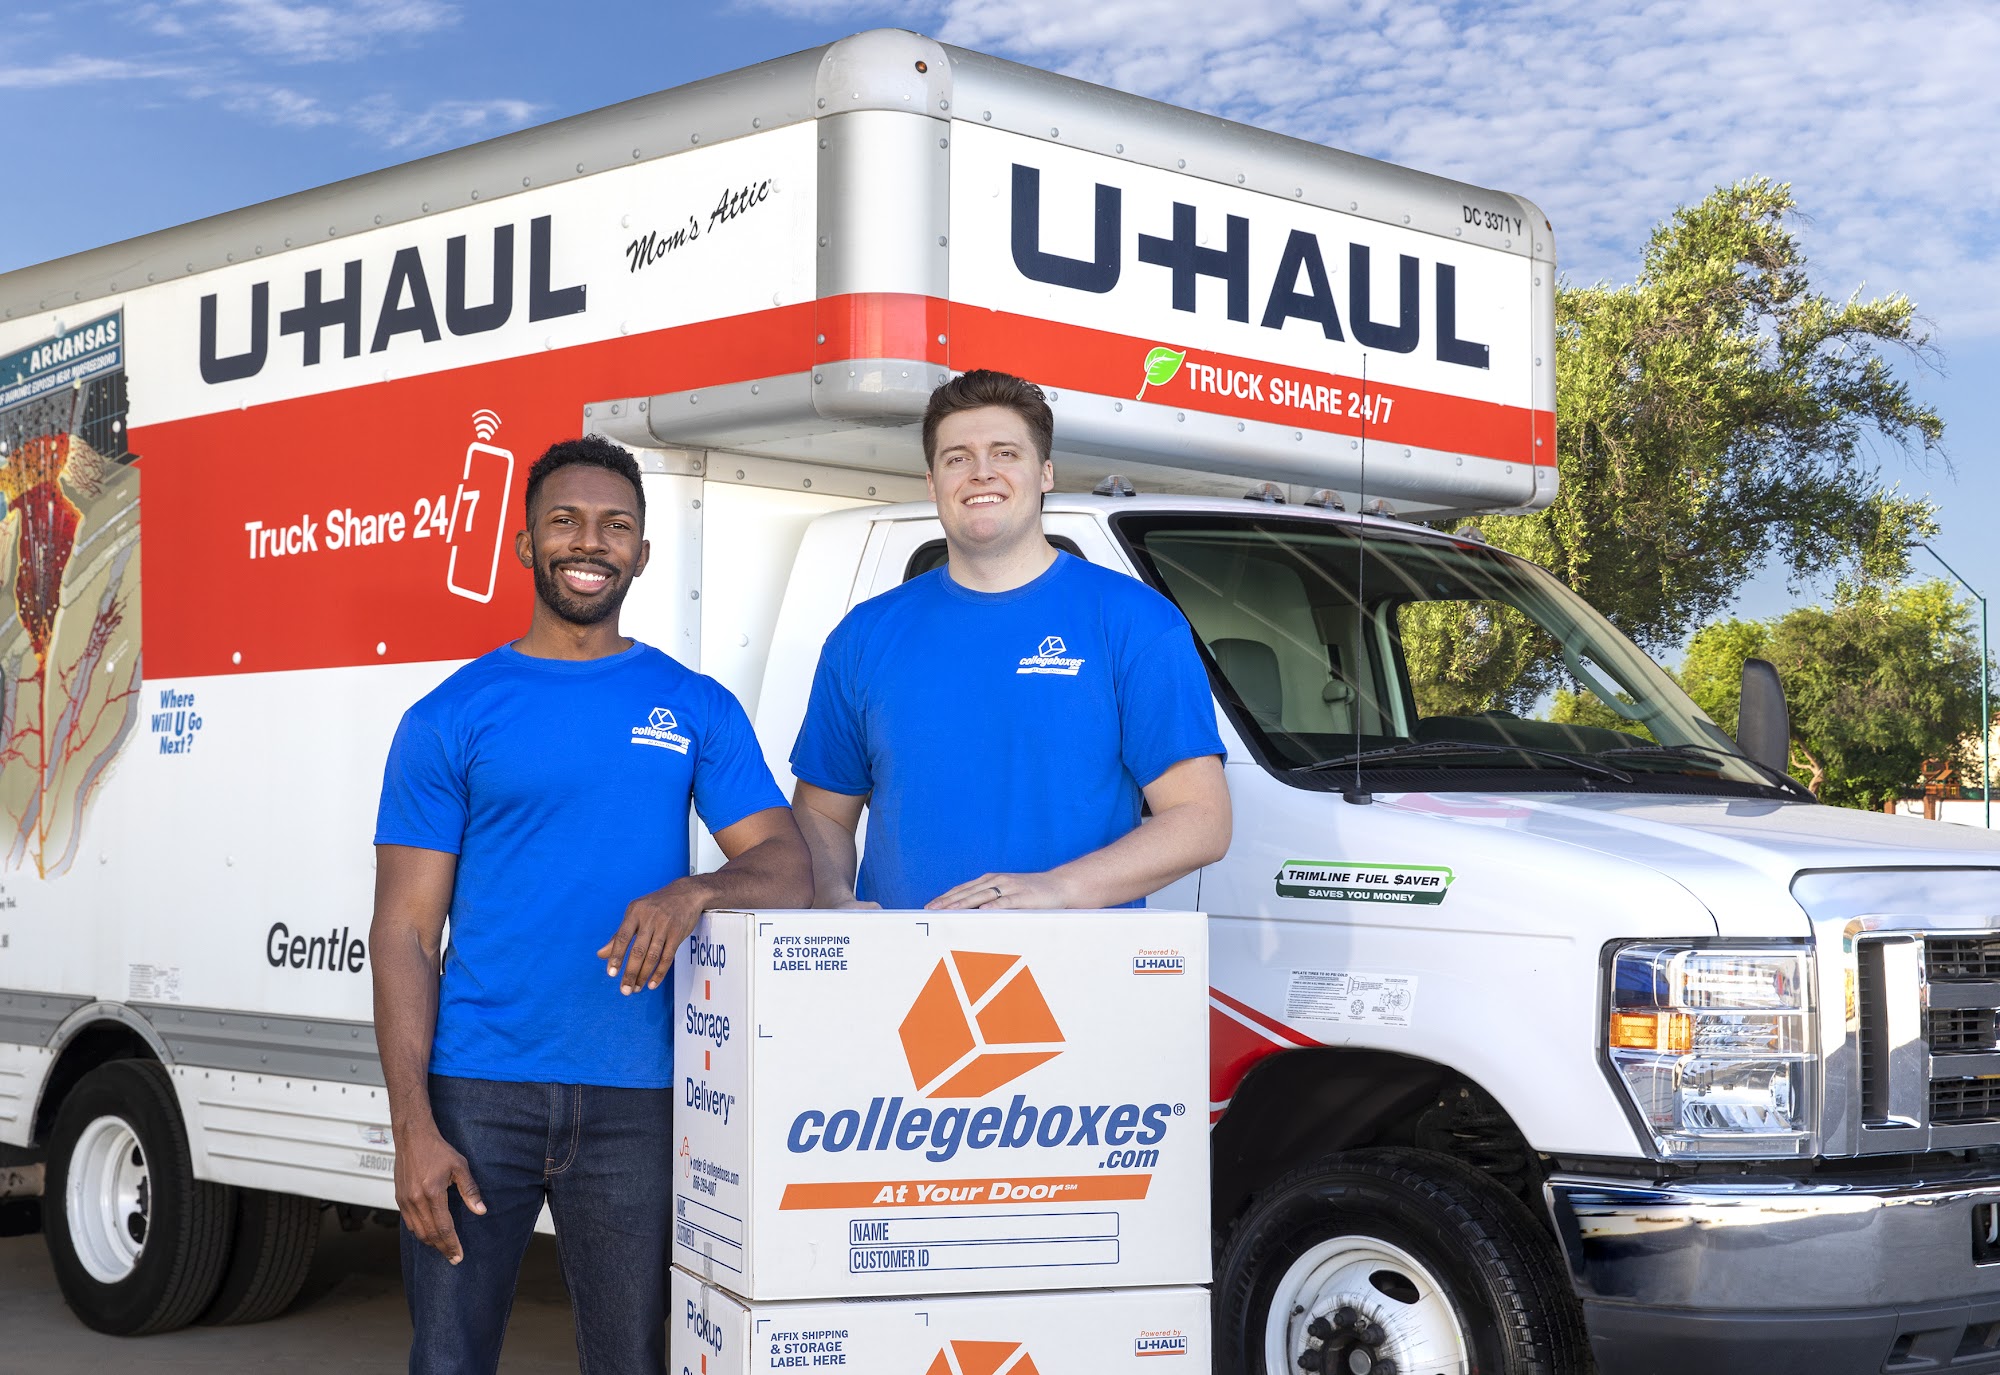 Collegeboxes at U-Haul Moving & Storage at North Ave